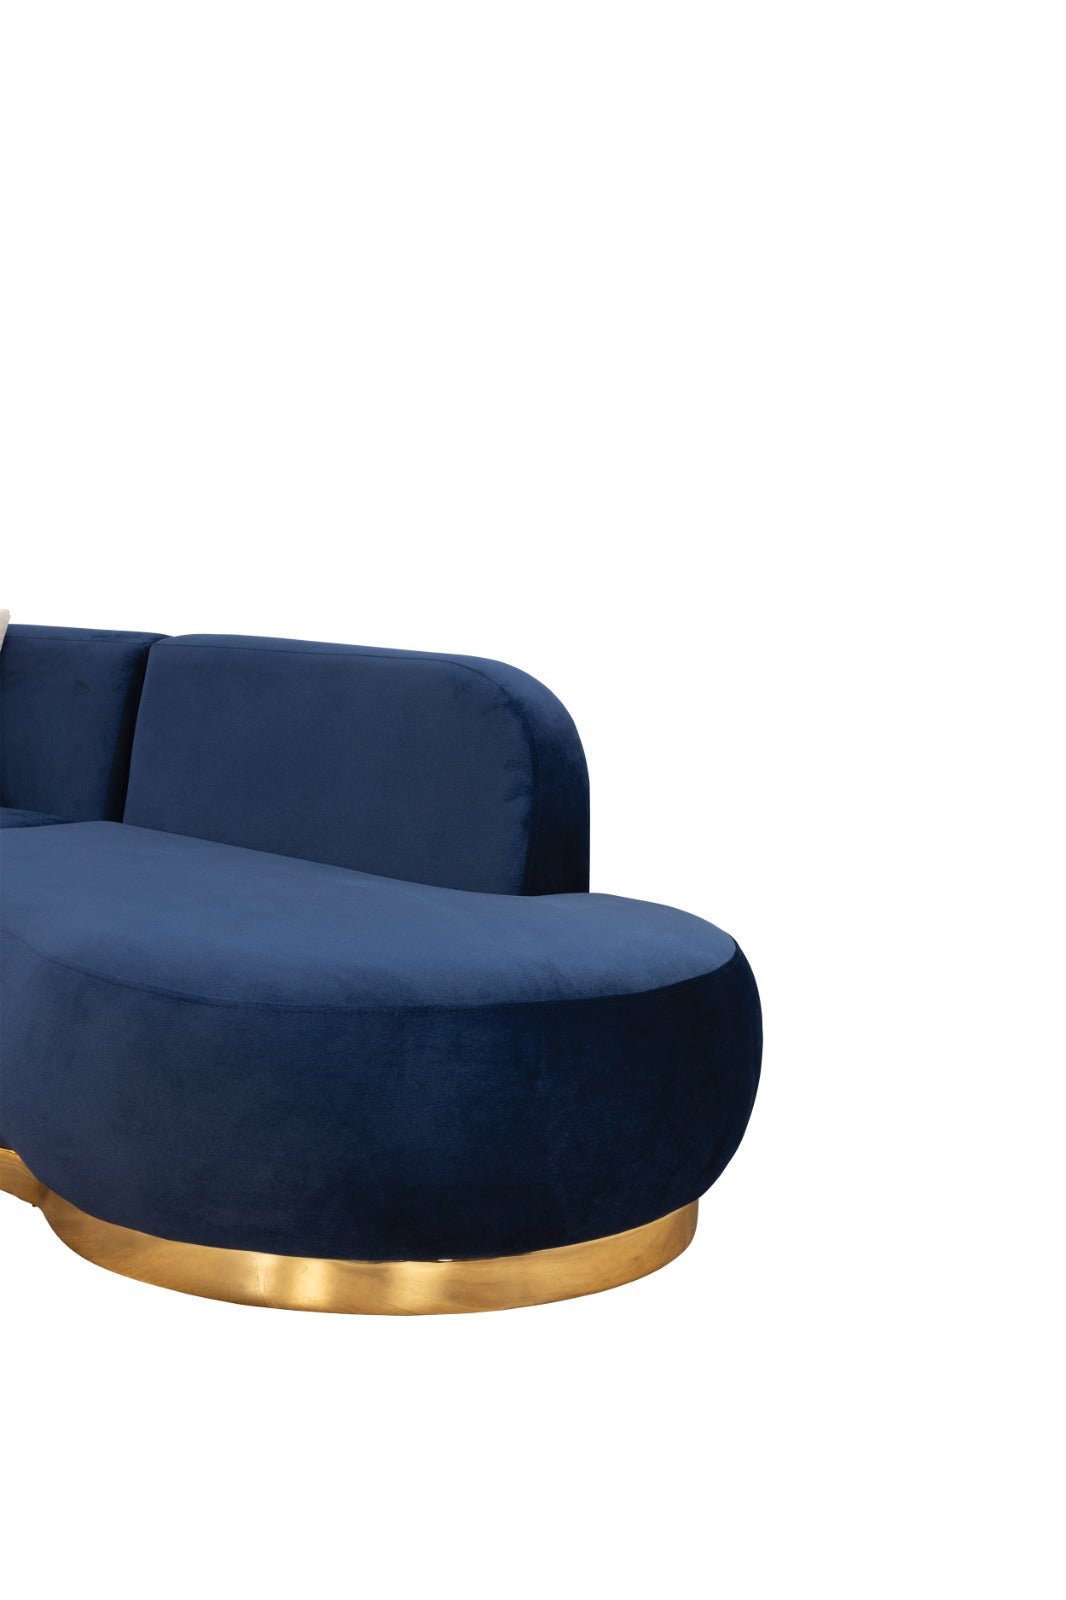 Seven Seater Turkish Sofa, FASULYA CORNER WITH PUFF - V Surfaces